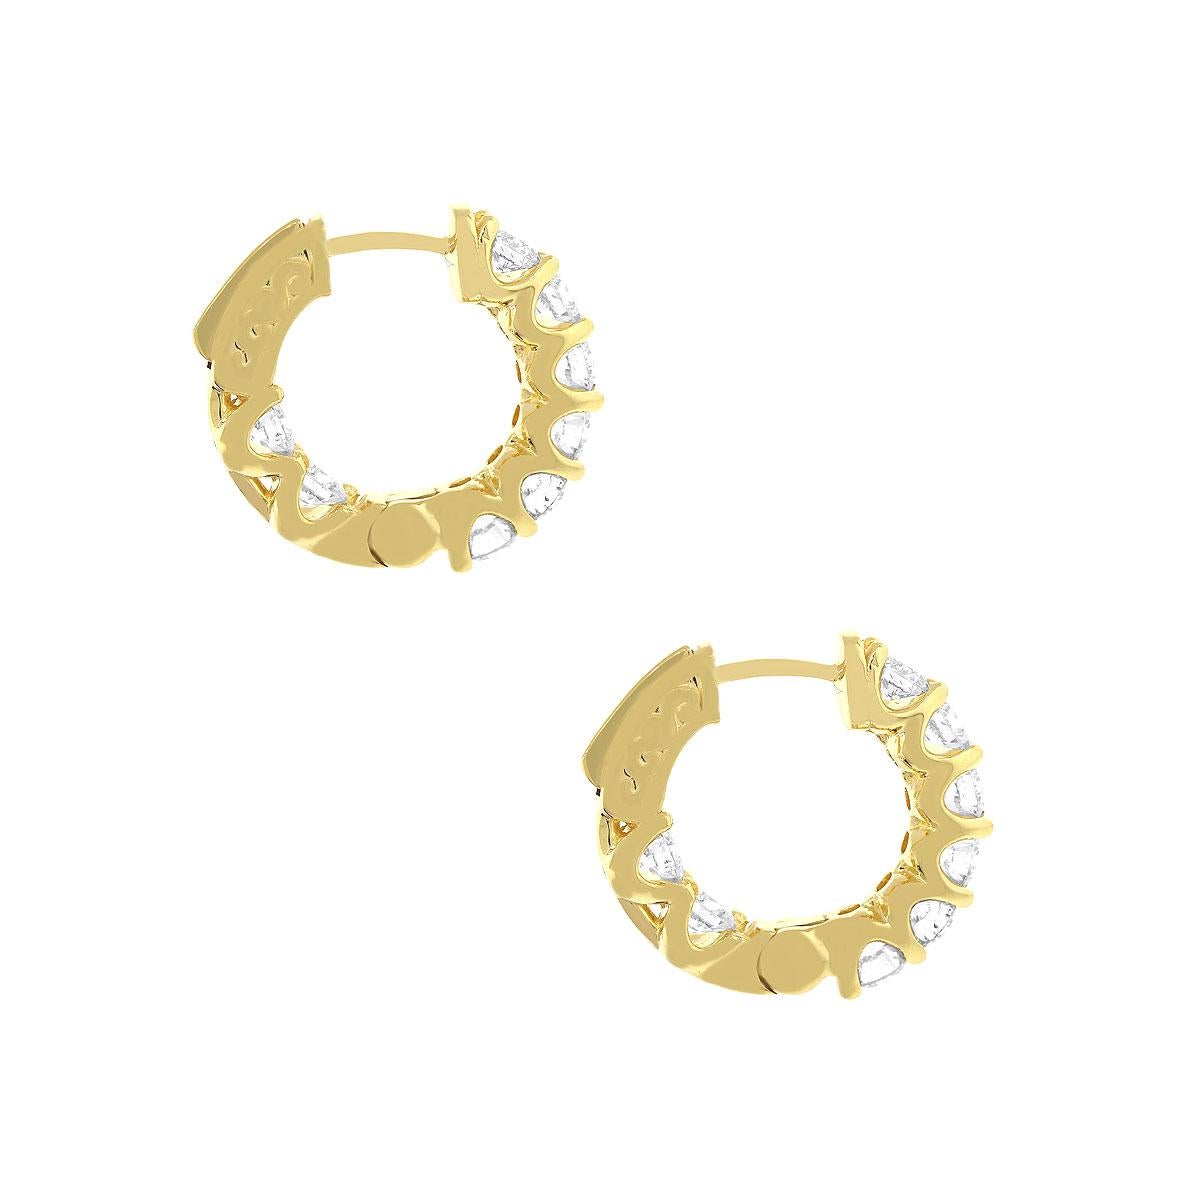 Material: 14k Yellow gold
Style: Diamond inside out hoop earrings
Diamond Details: 18 Stones, approximately 1.7ctw of round brilliant diamonds. Diamonds are G/H in color and VS in clarity.
Earring Measurements: 0.75″ x 0.20″ x 0.75″
Total Weight: